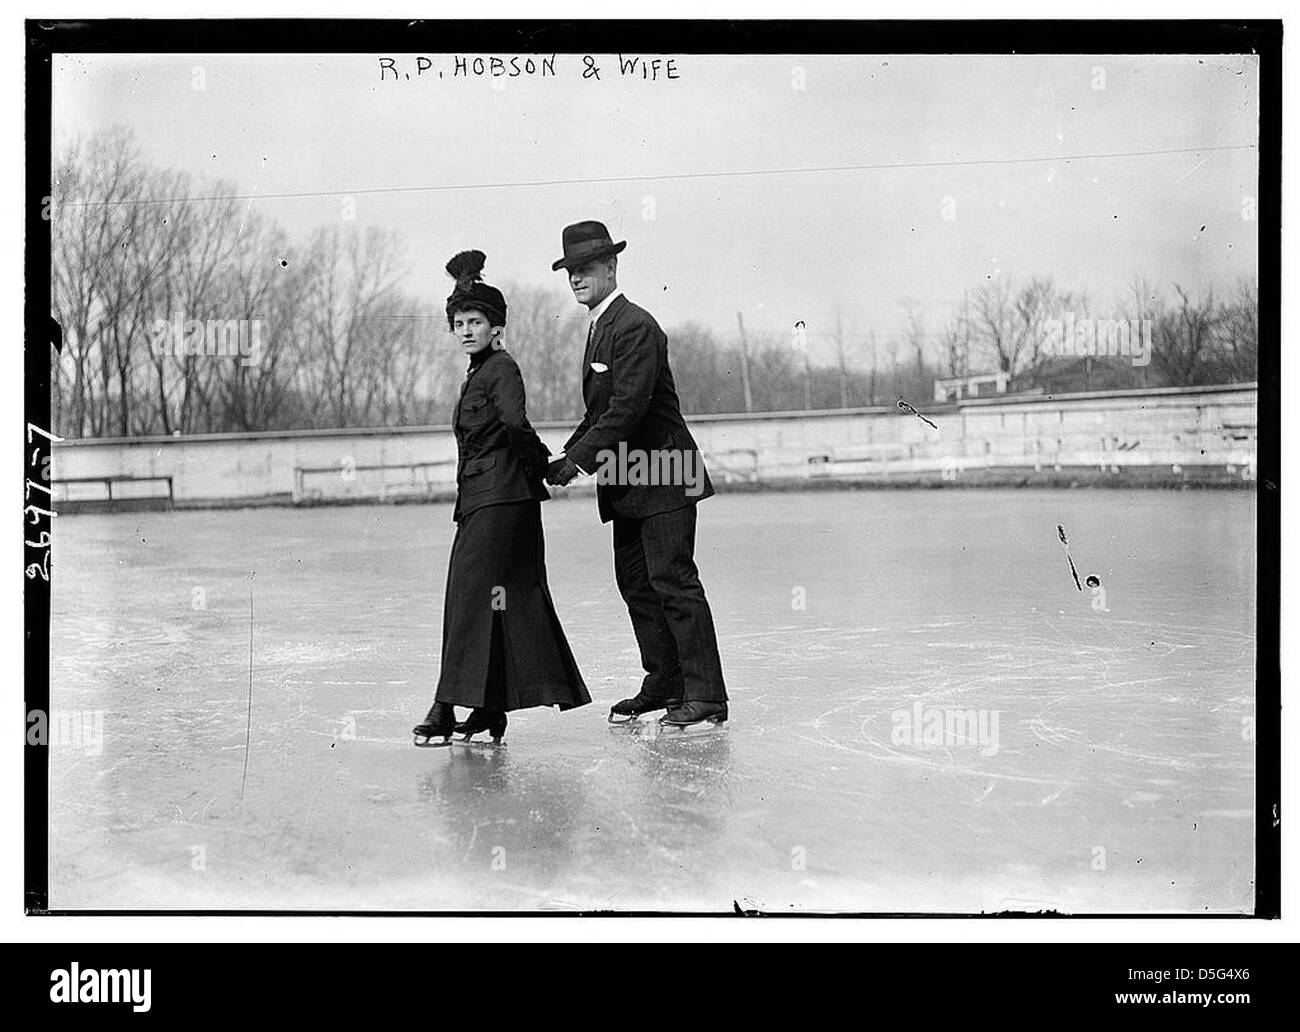 R.P. Hobson & wife (LOC) Stock Photo